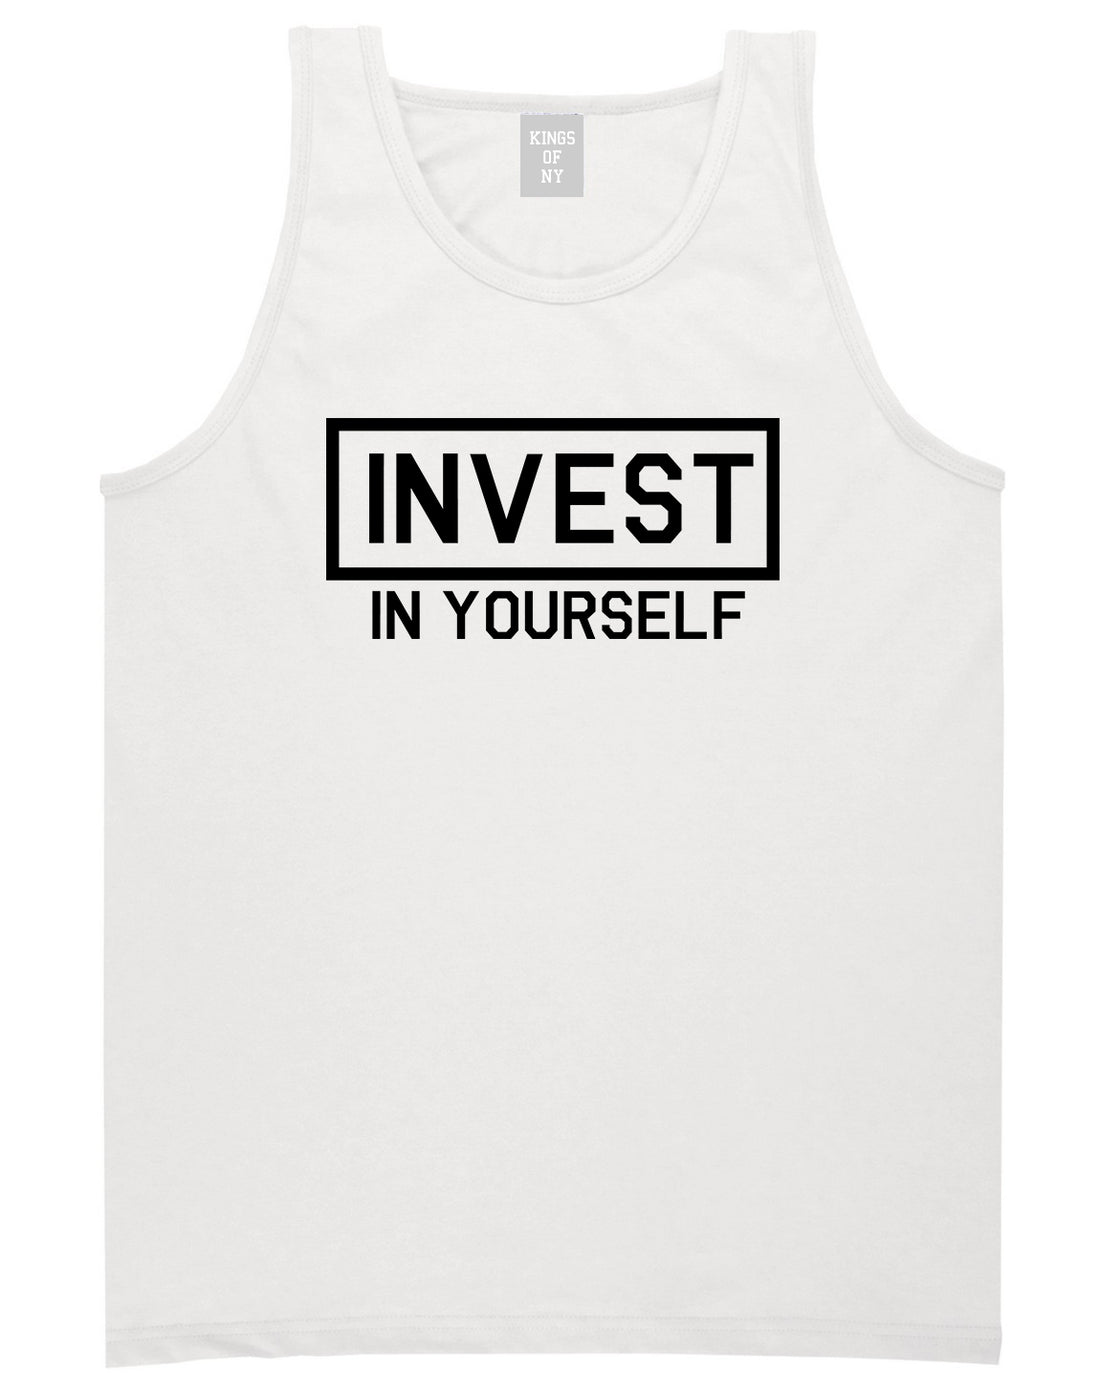 Invest In Yourself Mens Tank Top T-Shirt White